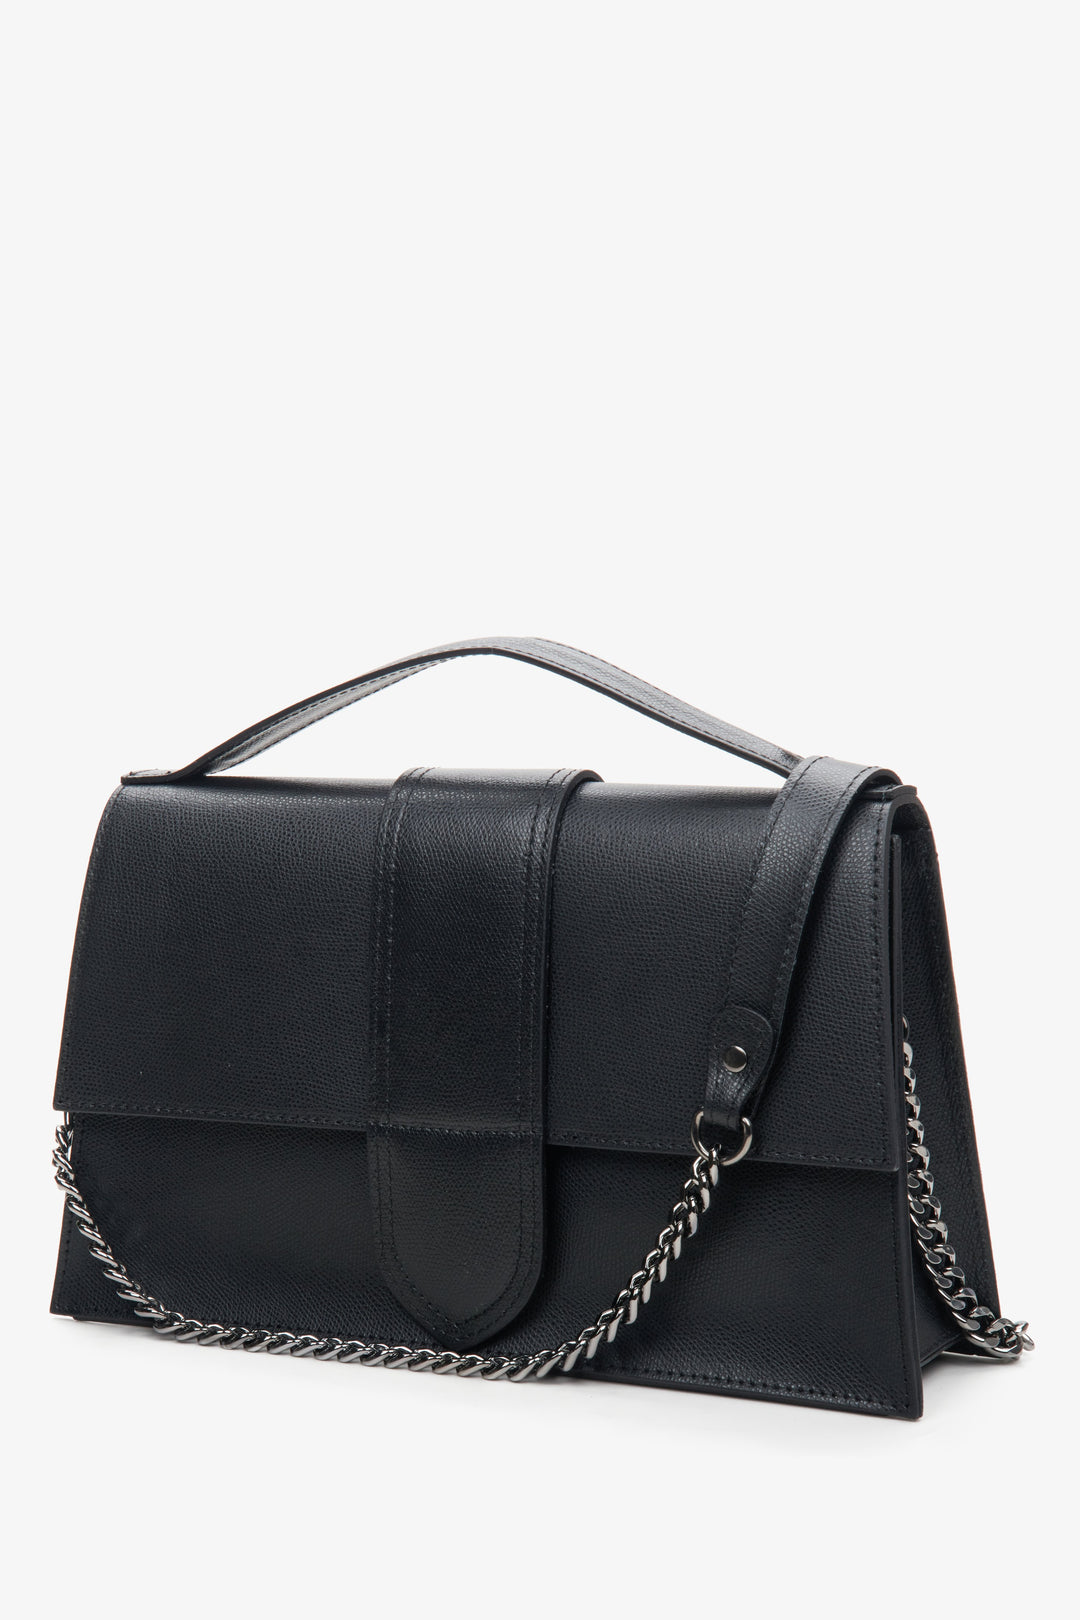 Women's small black leather handbag by Estro - close-up on the front of the model.